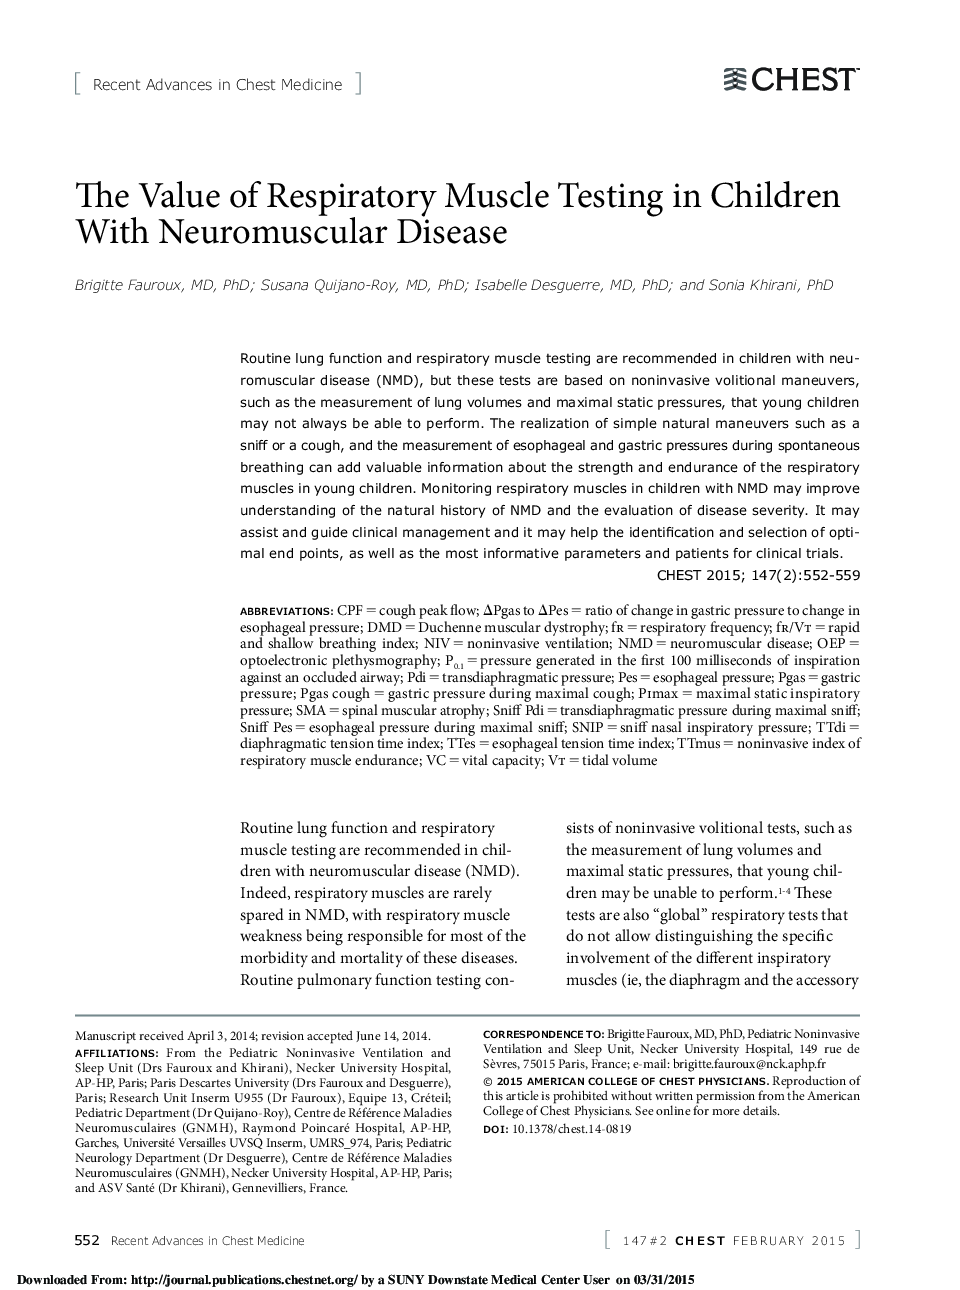 The Value of Respiratory Muscle Testing in Children With Neuromuscular Disease